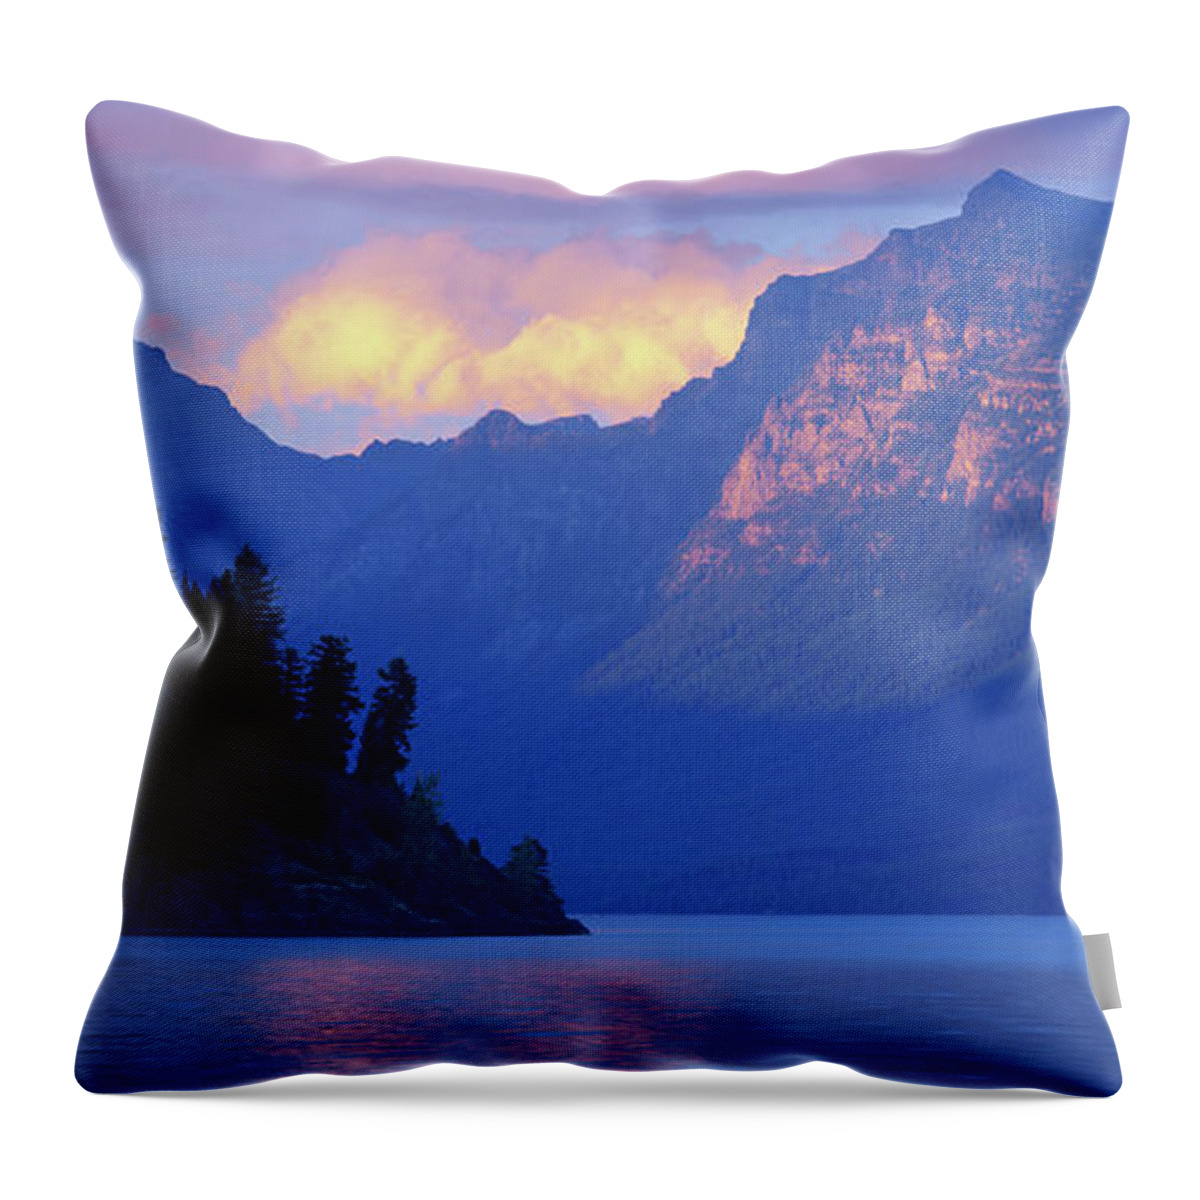 Scenics Throw Pillow featuring the photograph Usa, Montana, Glacier Np, Mountains by Paul Souders